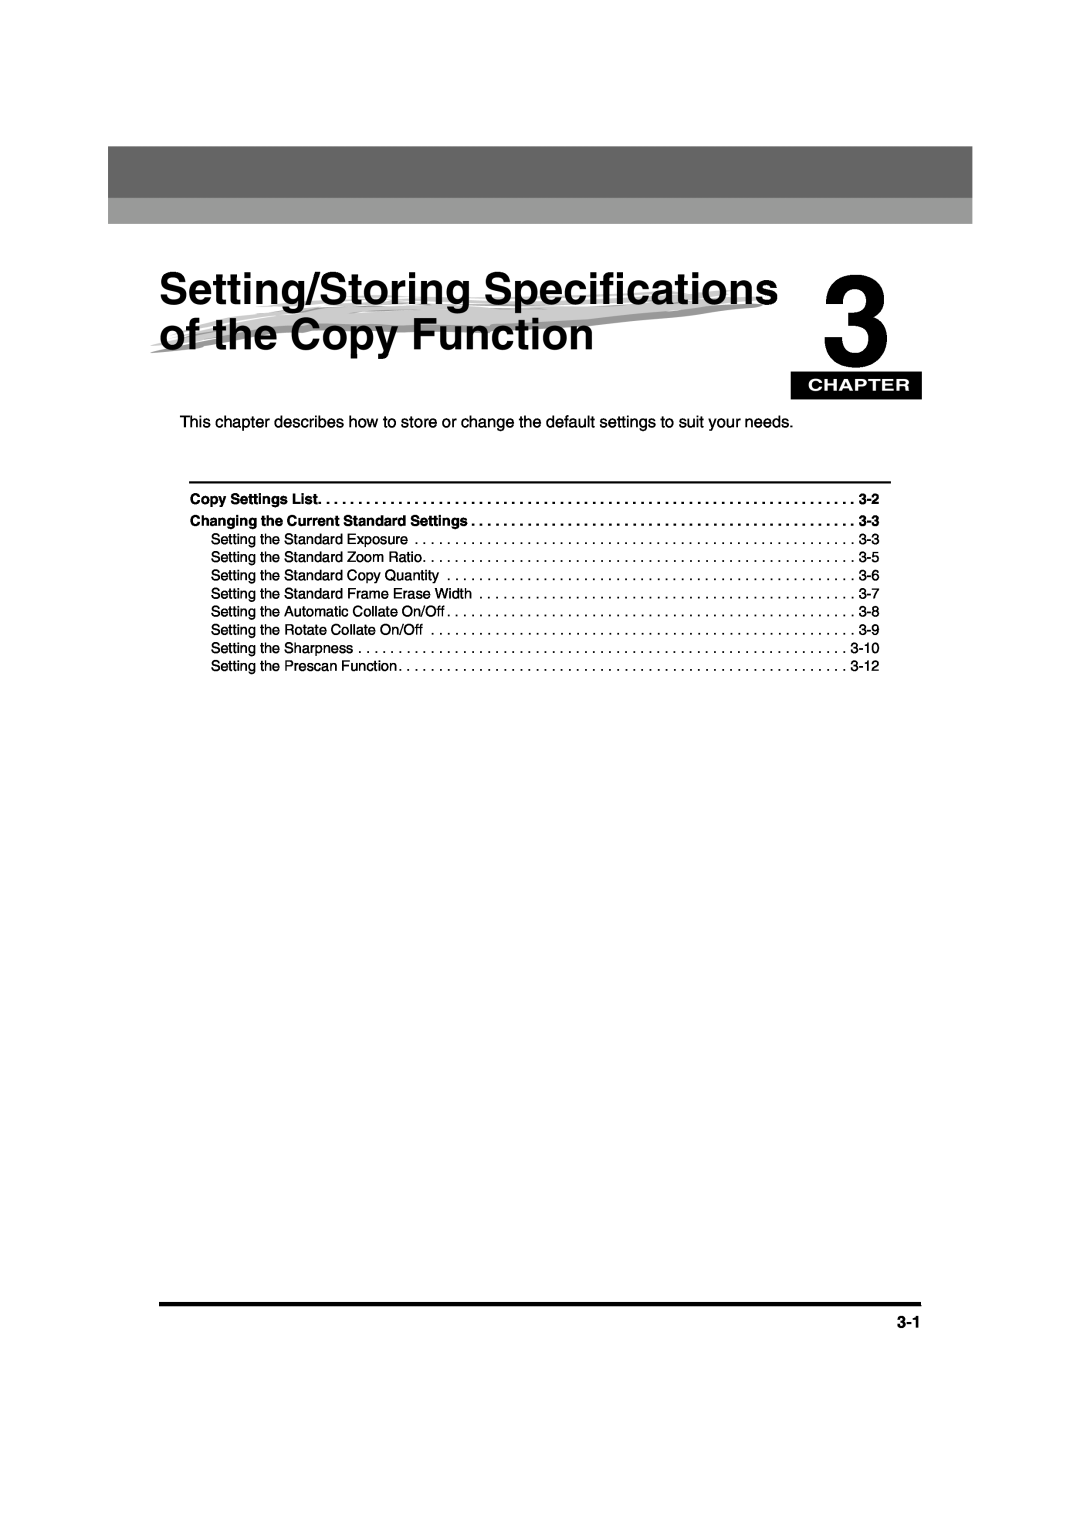 Canon IR1600 manual Setting/Storing Specifications of the Copy Function3, Chapter 